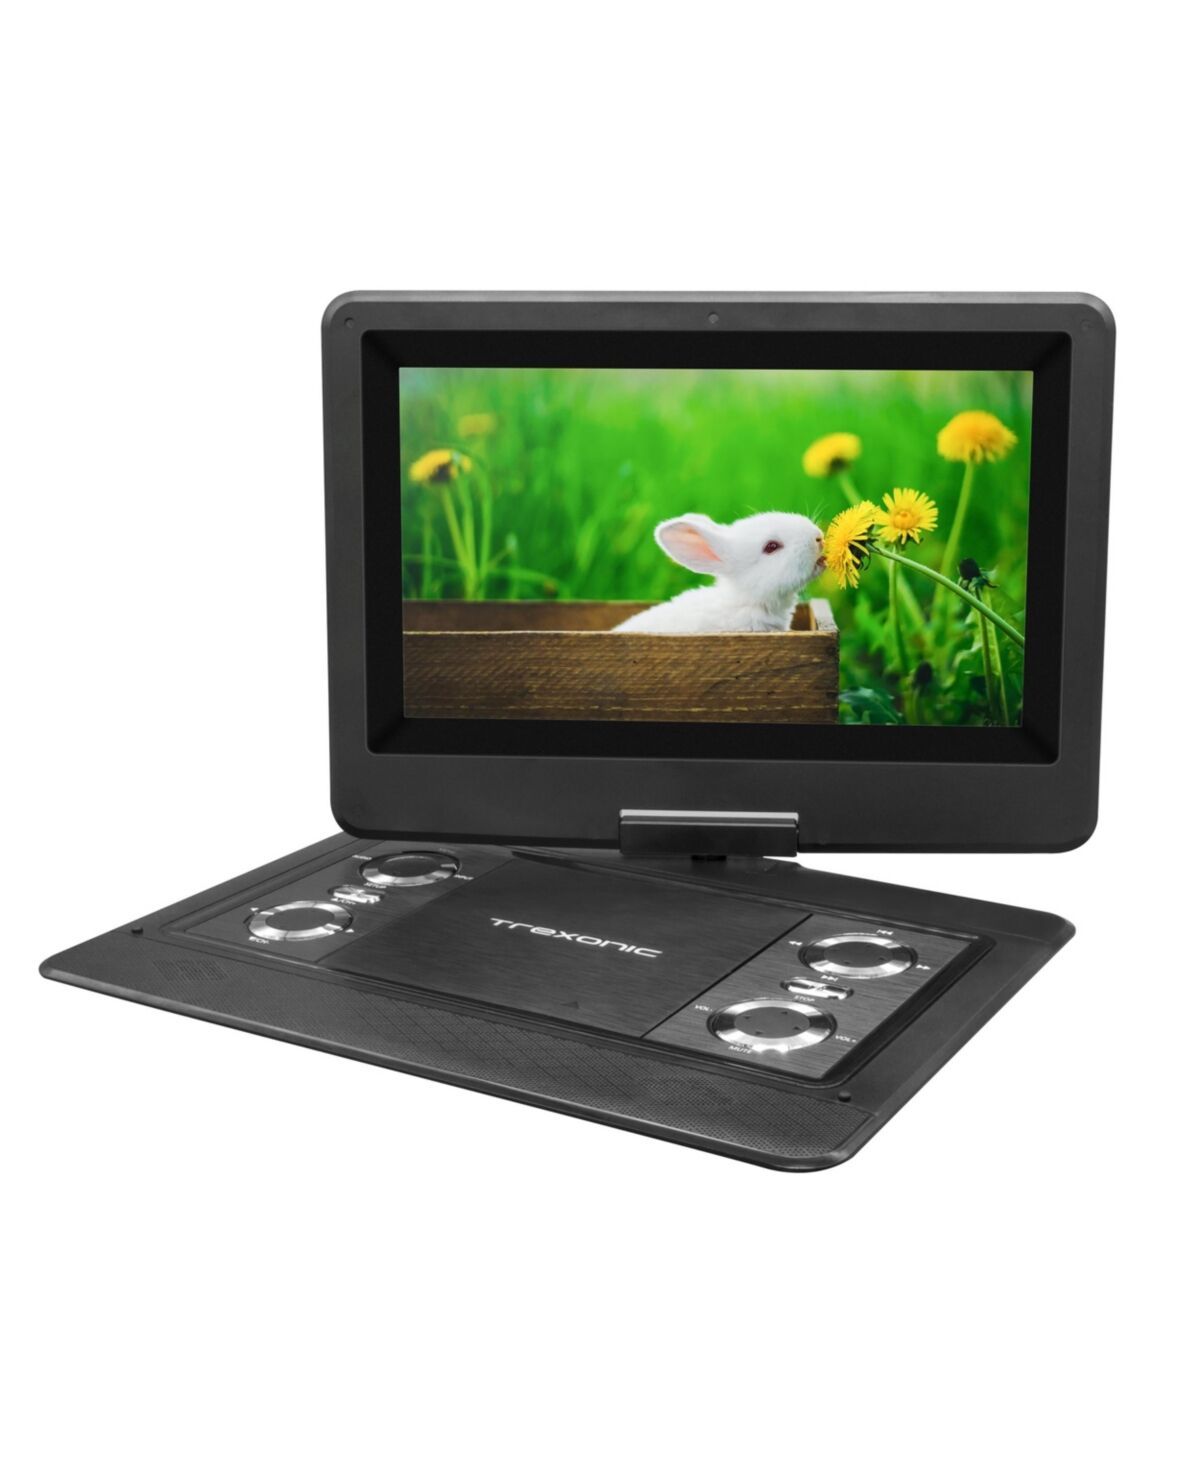 Trexonic 12.5 Inch Portable Tv+Dvd Player with Color Tft Led Screen and Usb/Hd/Av Inputs - Black